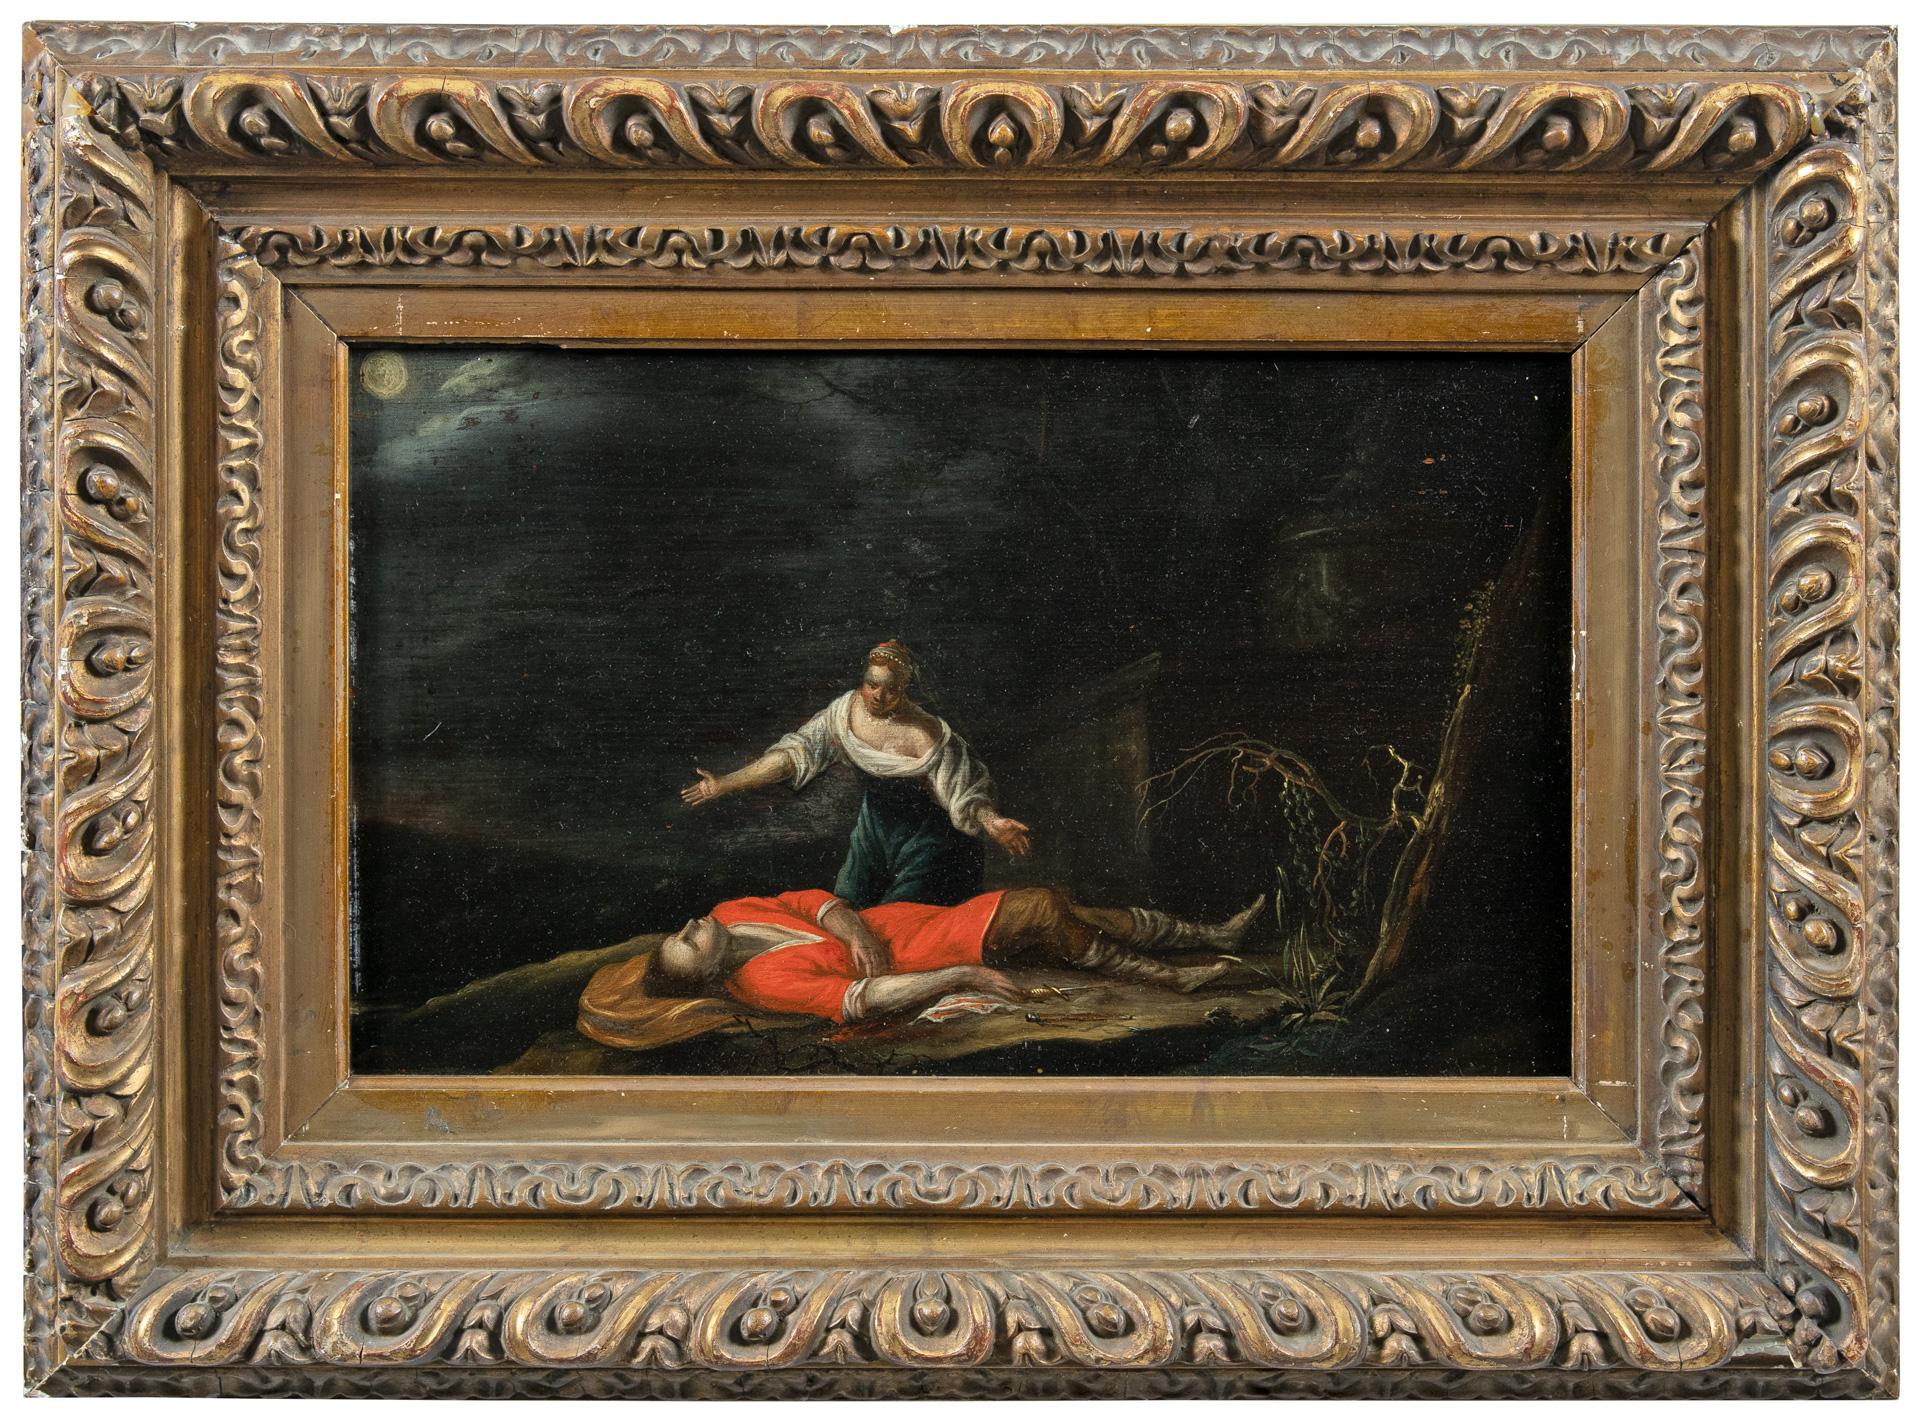 Unknown Landscape Painting - 17th century Italian figure painting - Pyramus Thisbe - Oil on panel Italy